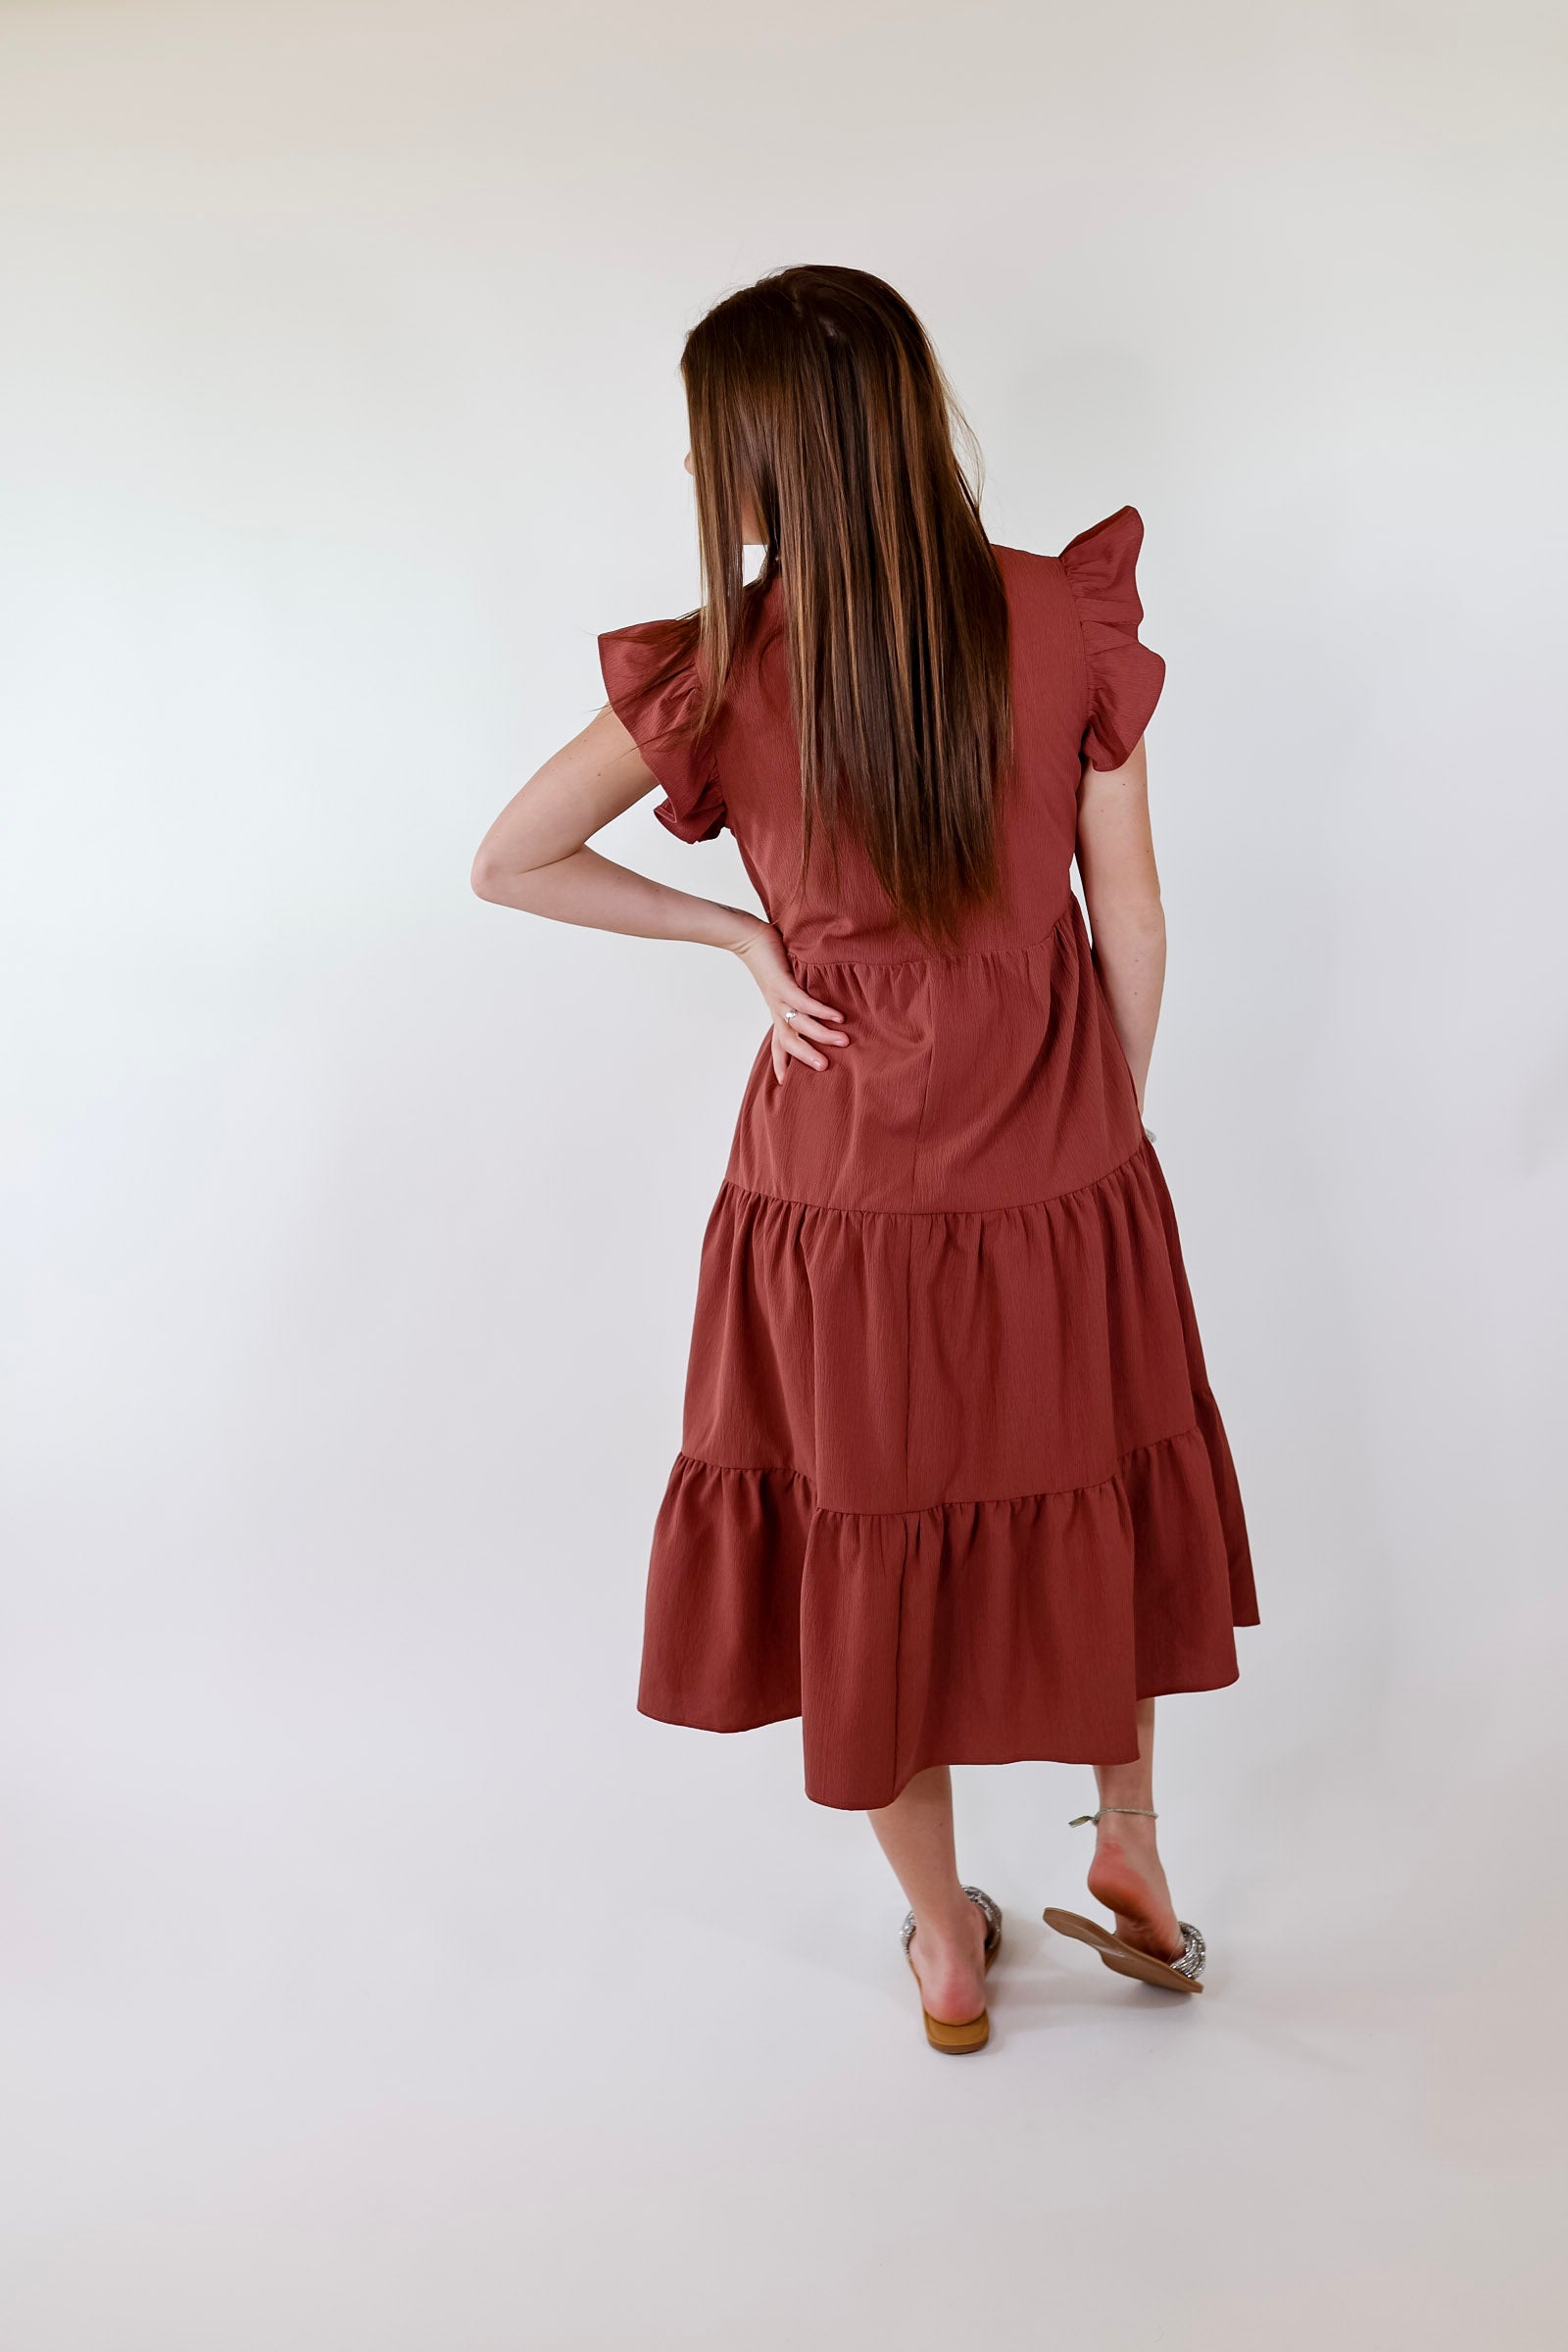 Magnolia Morning Ruffle Cap Sleeve Tiered Midi Dress in Cinnamon - Giddy Up Glamour Boutique